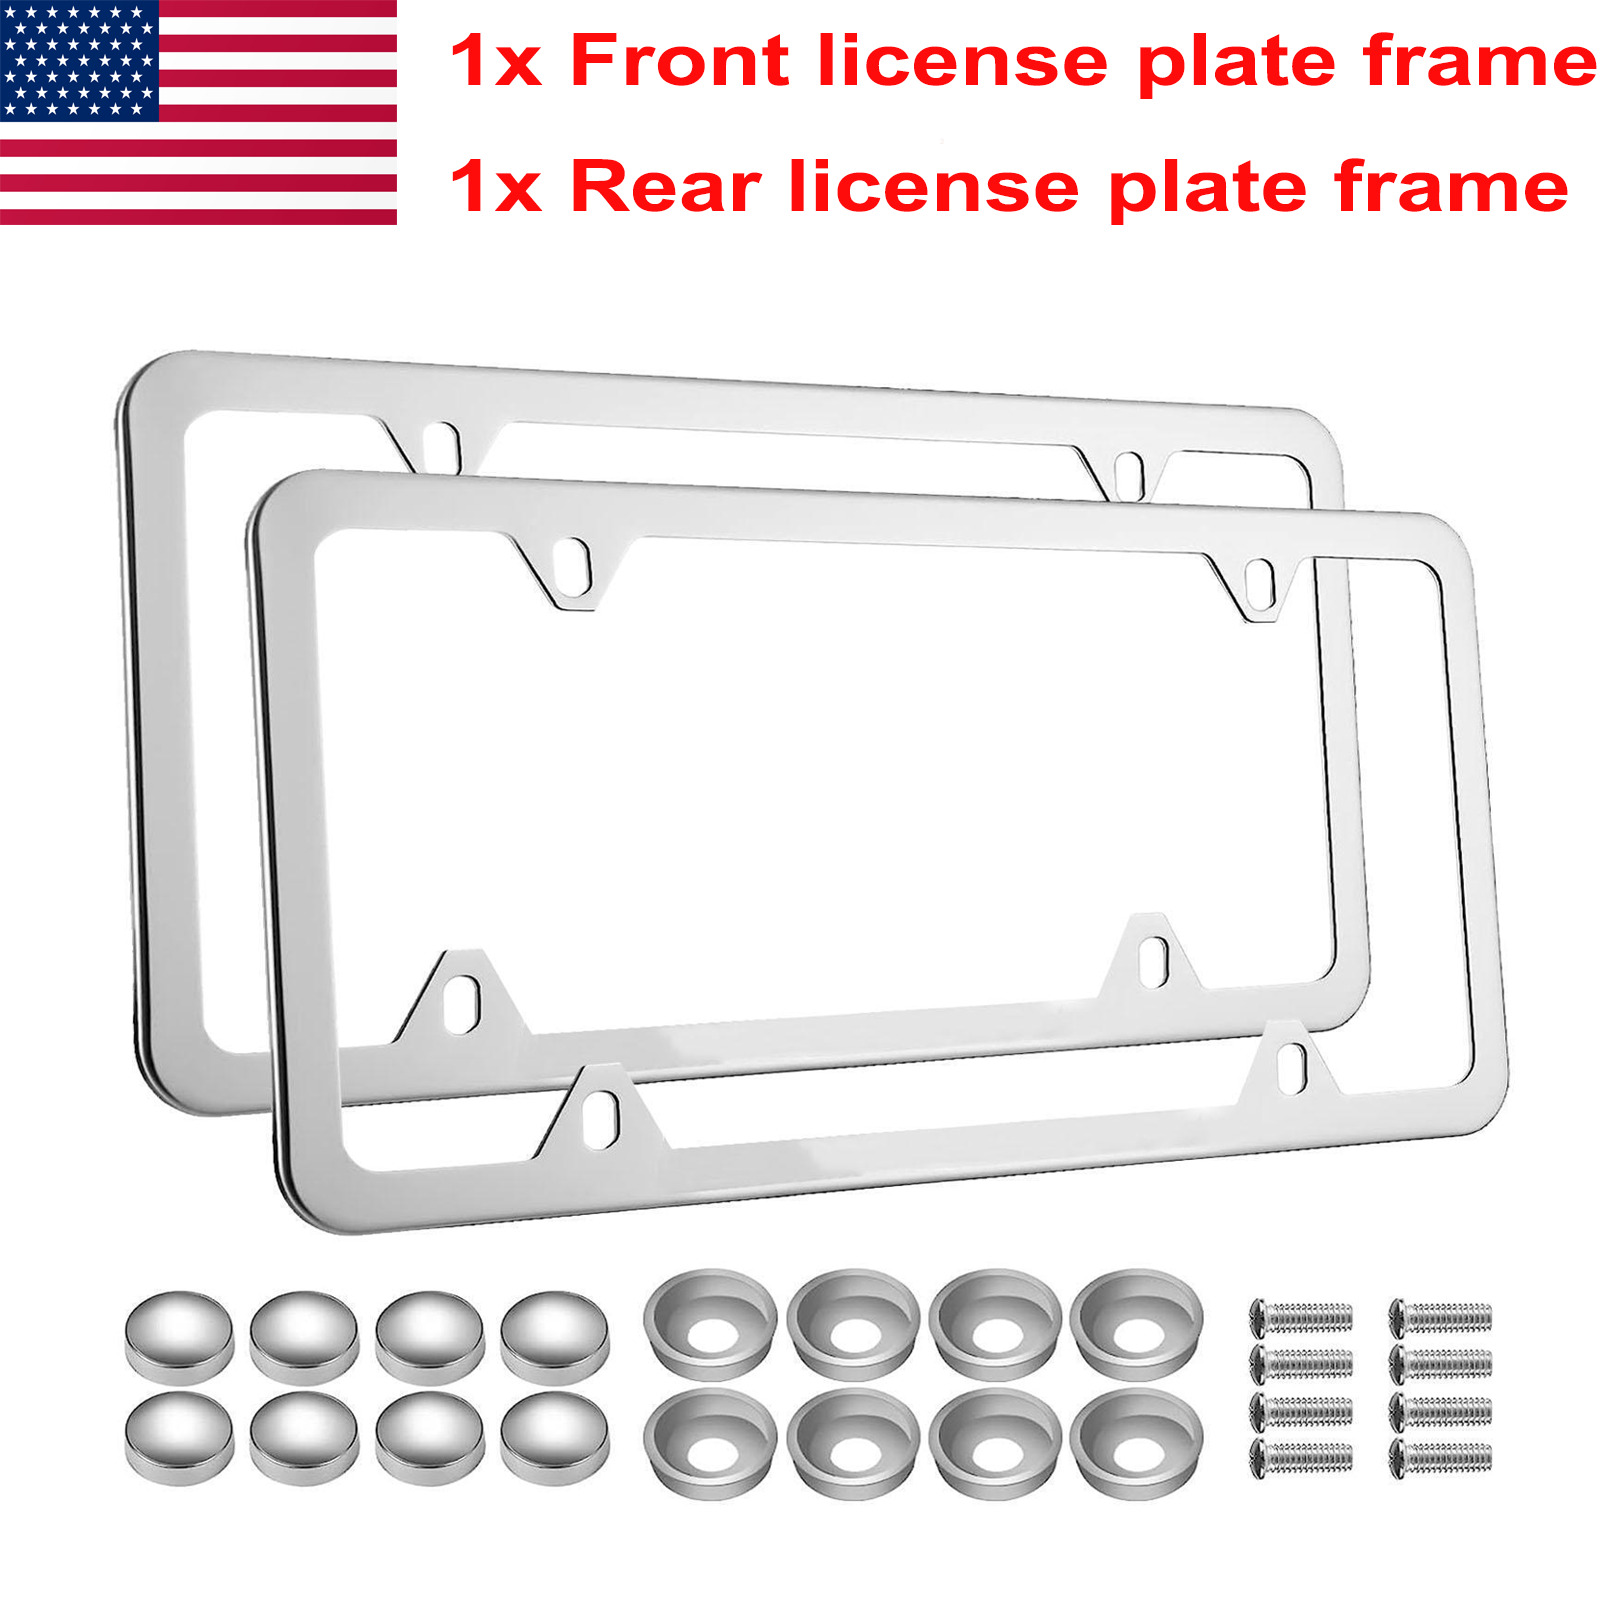 2Pcs Chrome Stainless Steel Metal License Plate Frame Tag Cover With Screw Caps